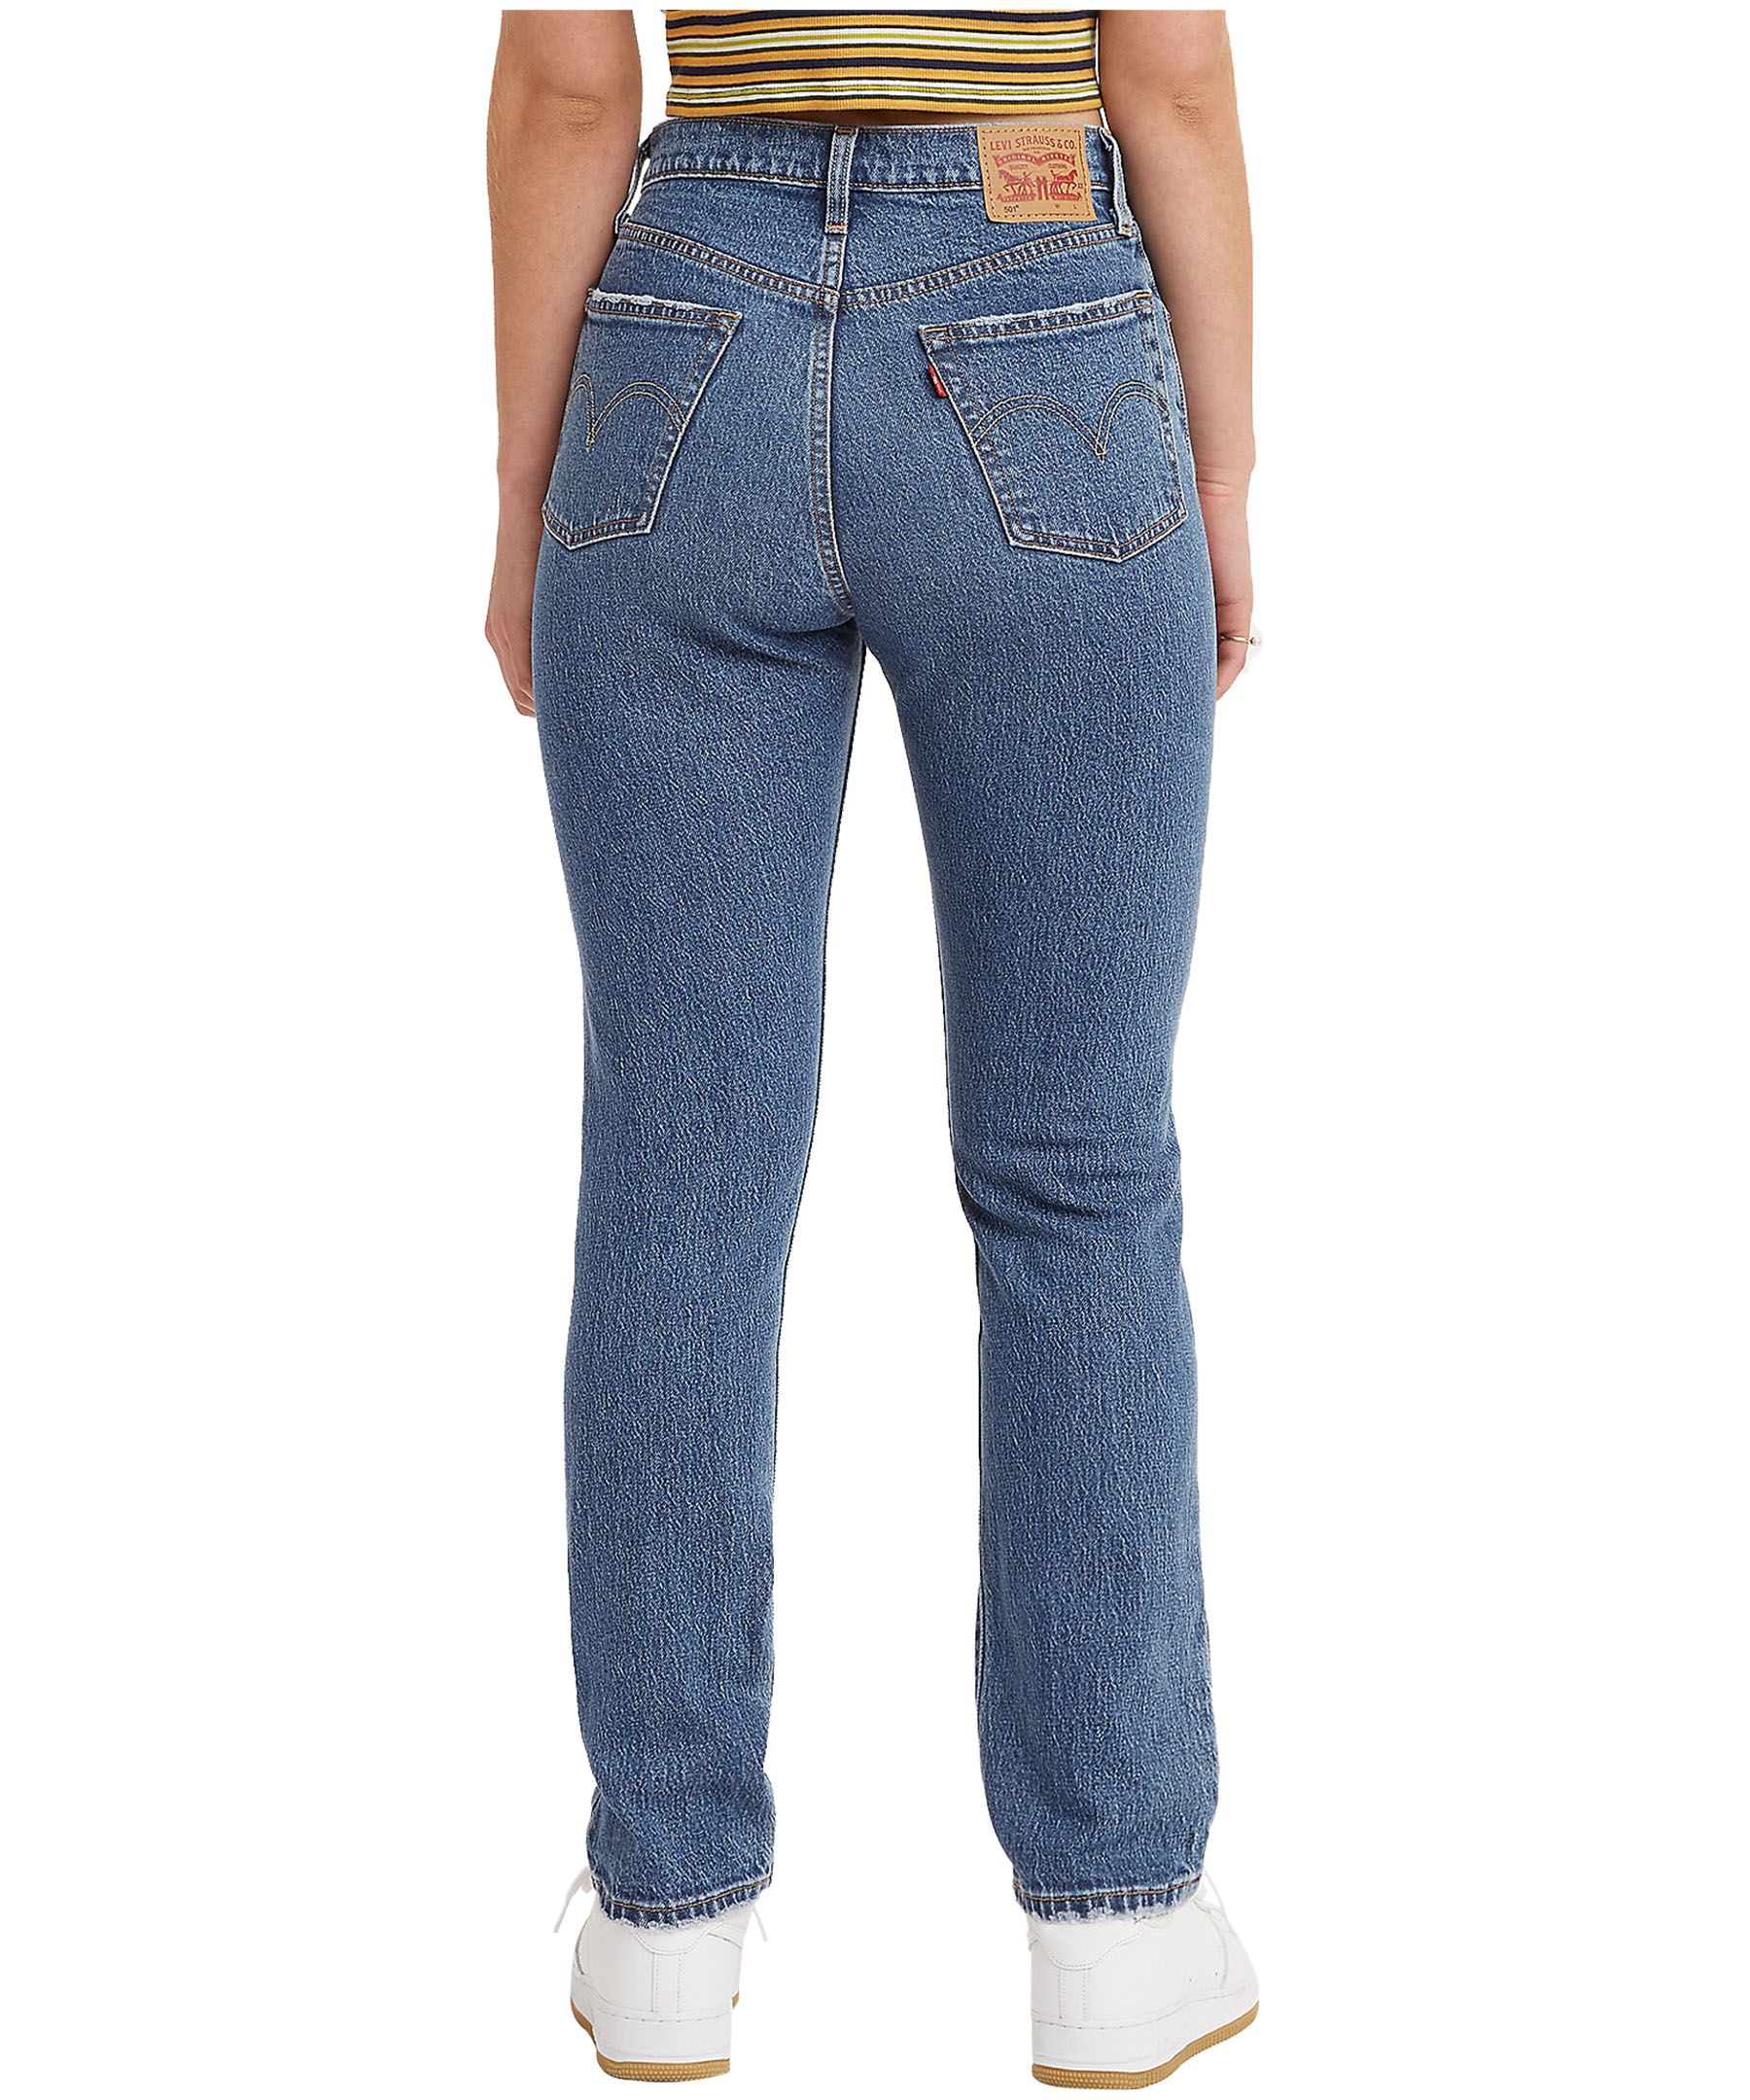 https://media-www.marks.com/product/marks-work-wearhouse/ladies-world/ladies-denim/410035255021/levi-s-women-s-501-high-rise-straight-leg-jeans-5826959c-549a-48db-9300-4230a892bcca-jpgrendition.jpg?imdensity=1&imwidth=1244&impolicy=mZoom